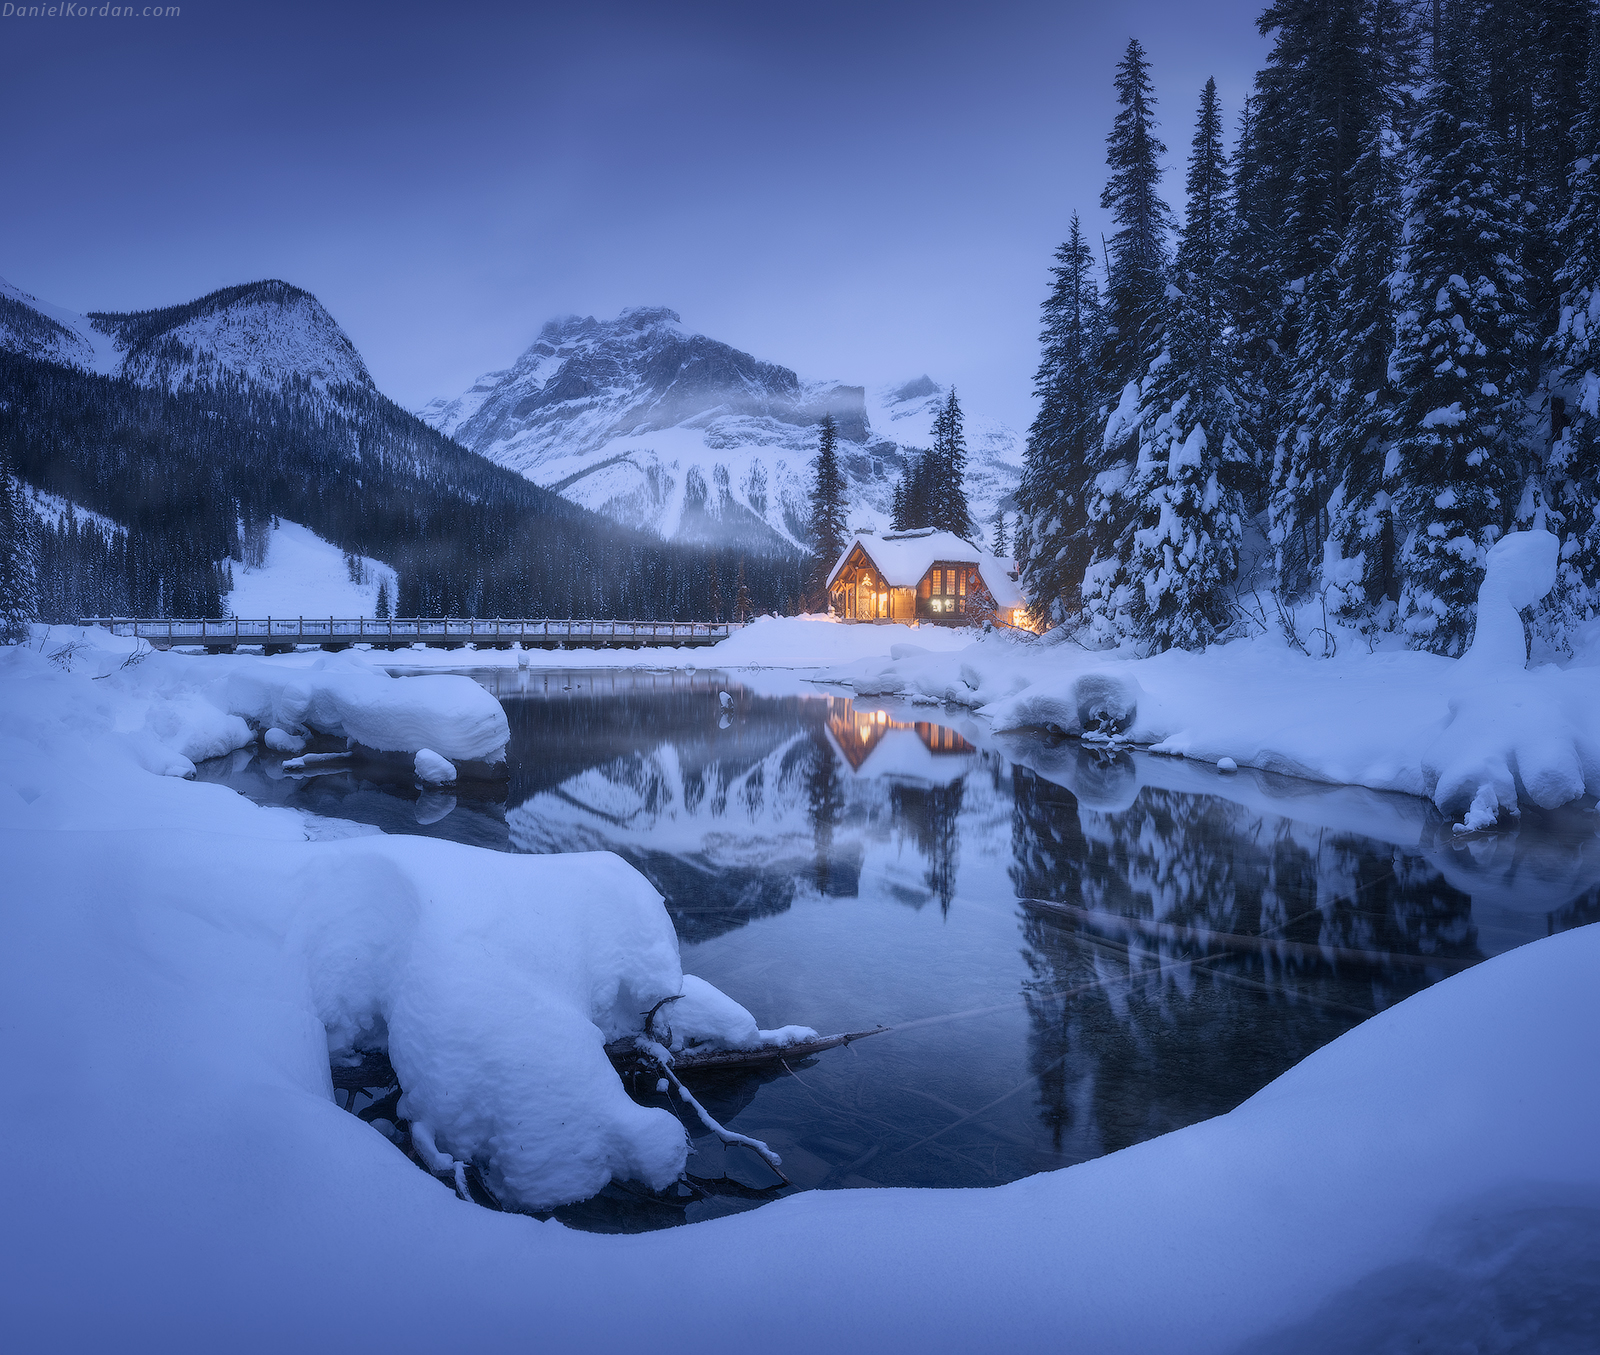 Winter Snow Snow Covered Ice Frozen River Water Reflection House Night Lights Forest Landscape Photo 1600x1355